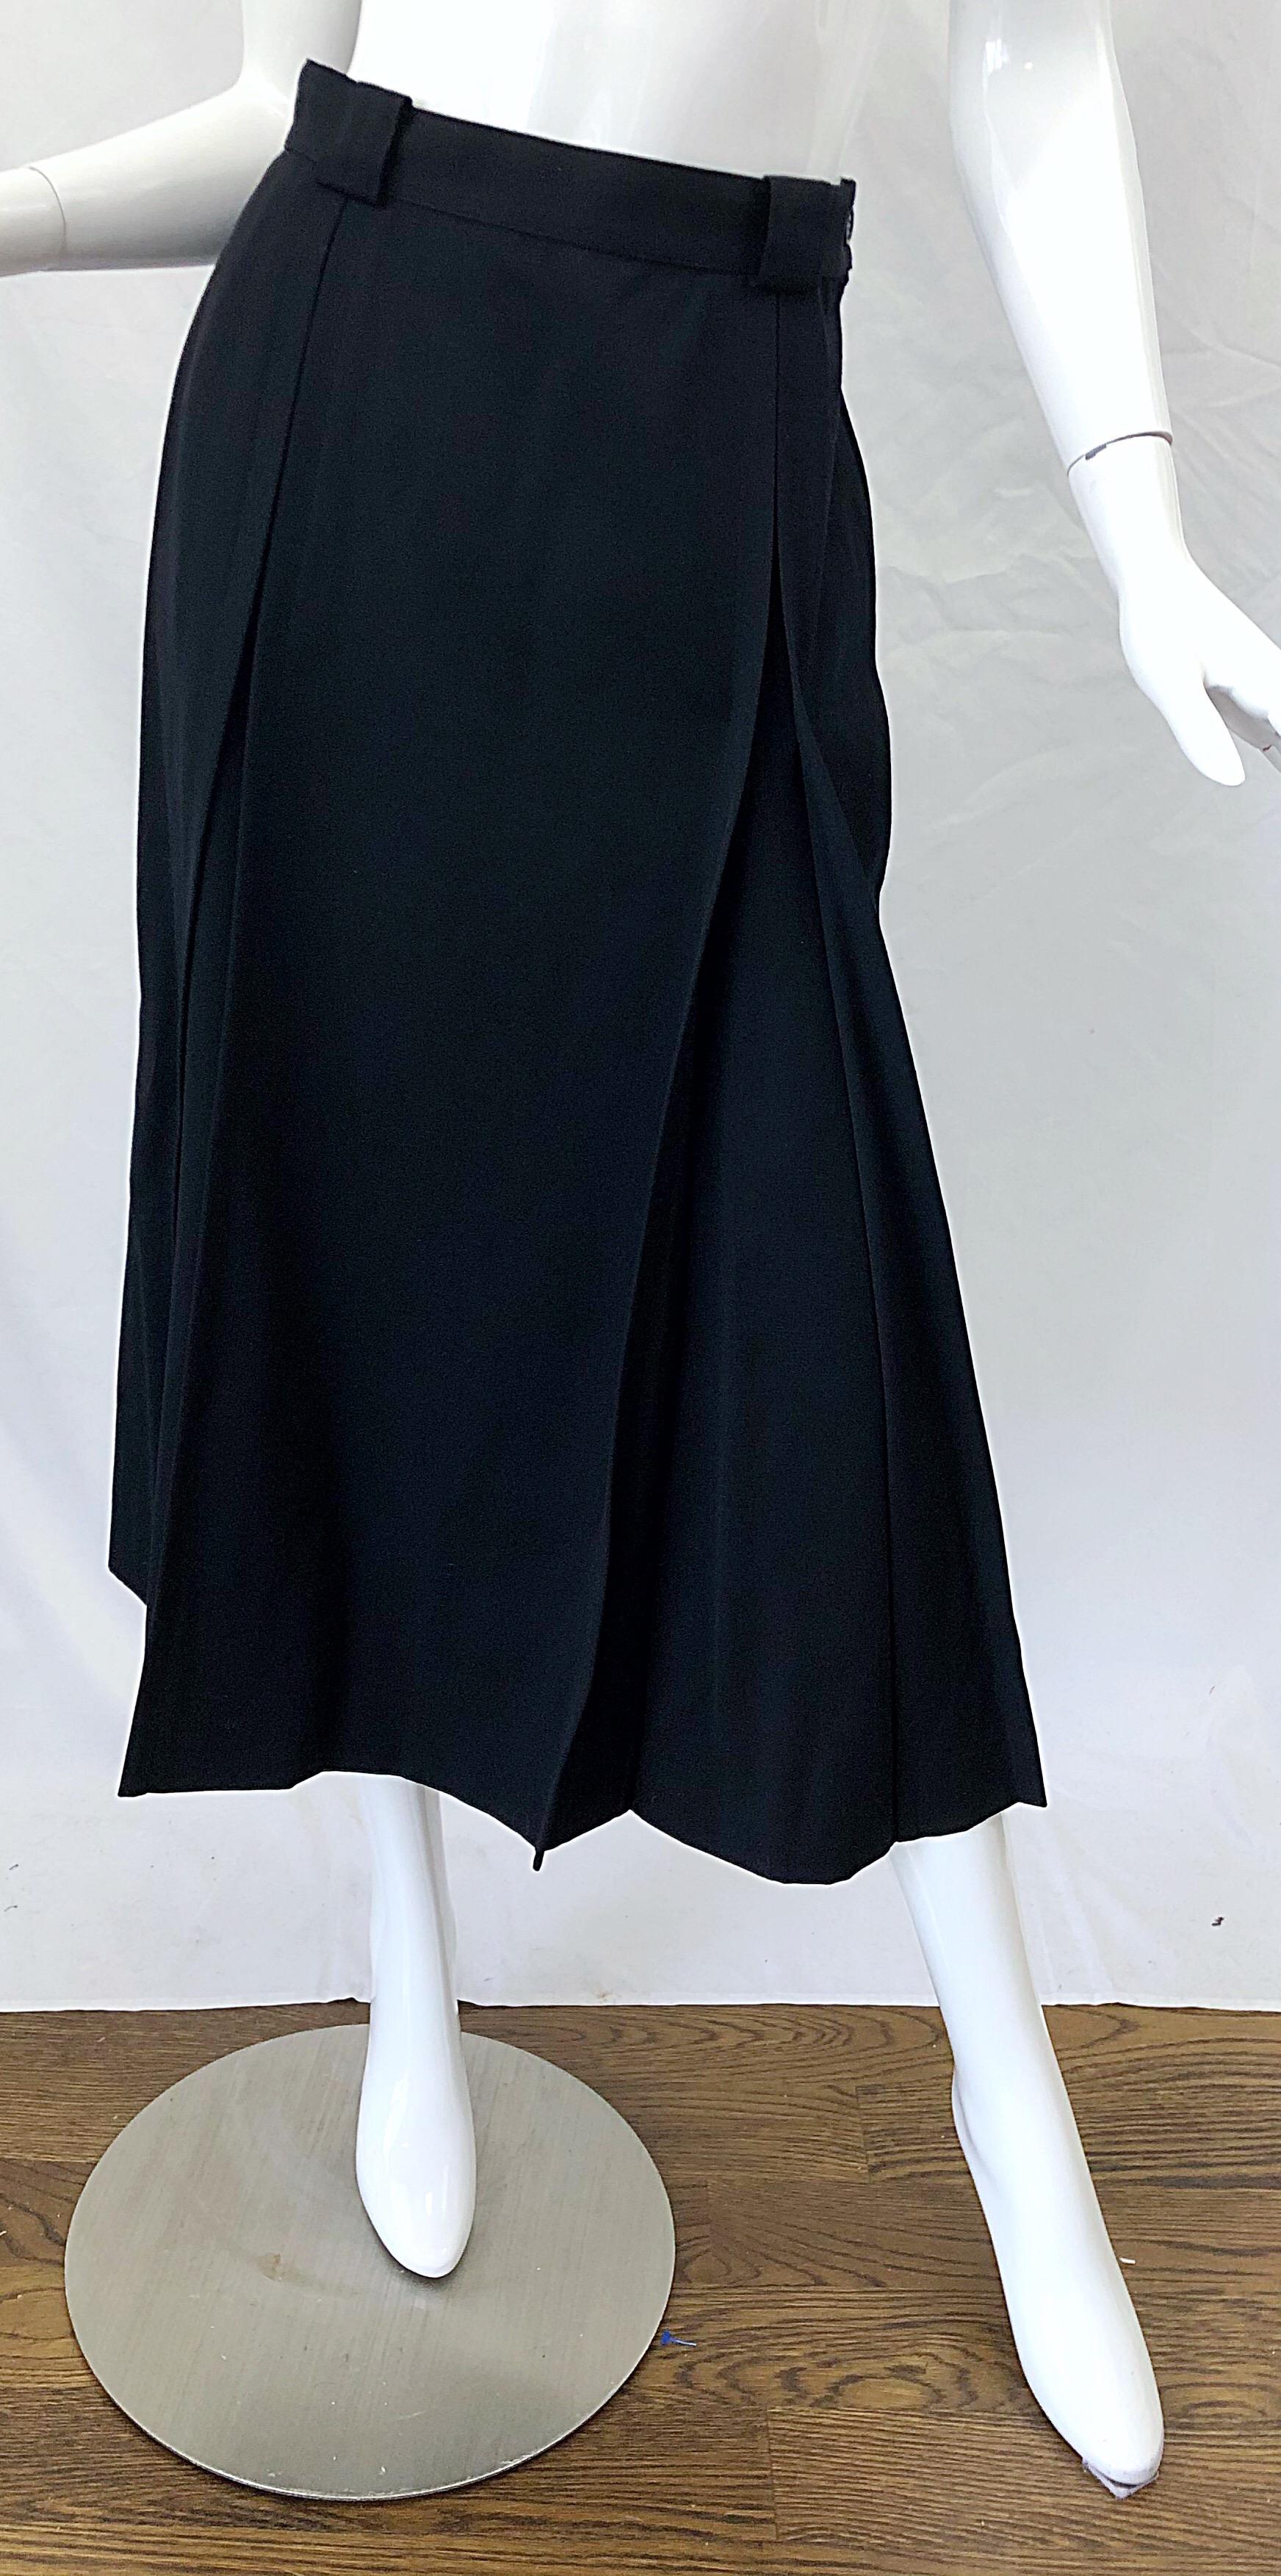 Stylish and classic late 1970s GUCCI black gabardine wool midi skirt ! Features flattering pleats. High waisted fit. Hidden zipper up the side with button closure. Fully lined. The perfect skirt for any time of year. Can easily be dressed up or